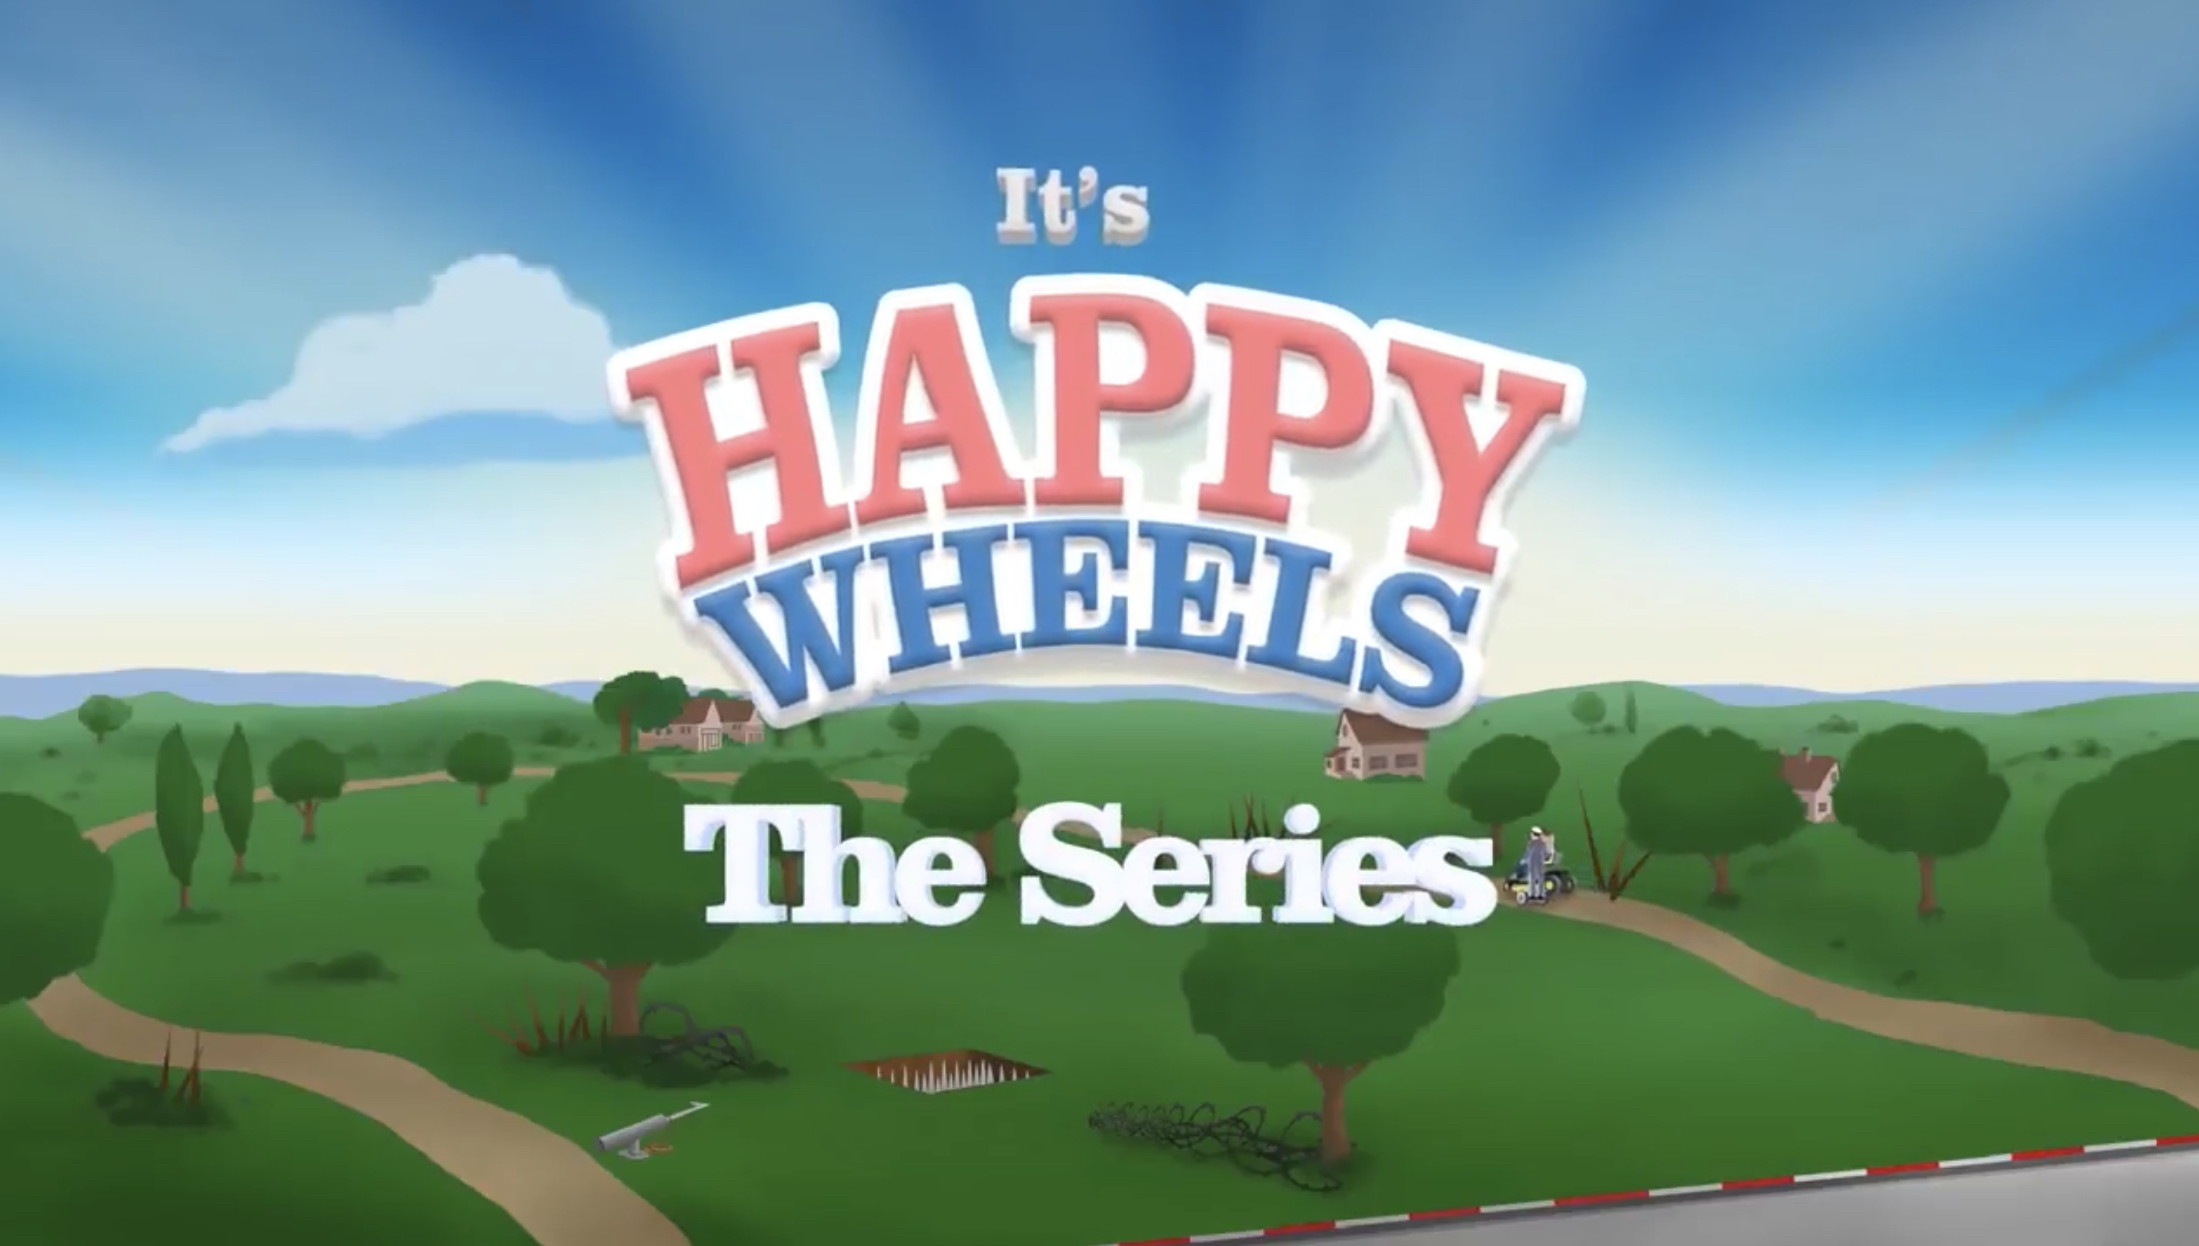 Happy Wheels: The Series (partially lost go90 animated series